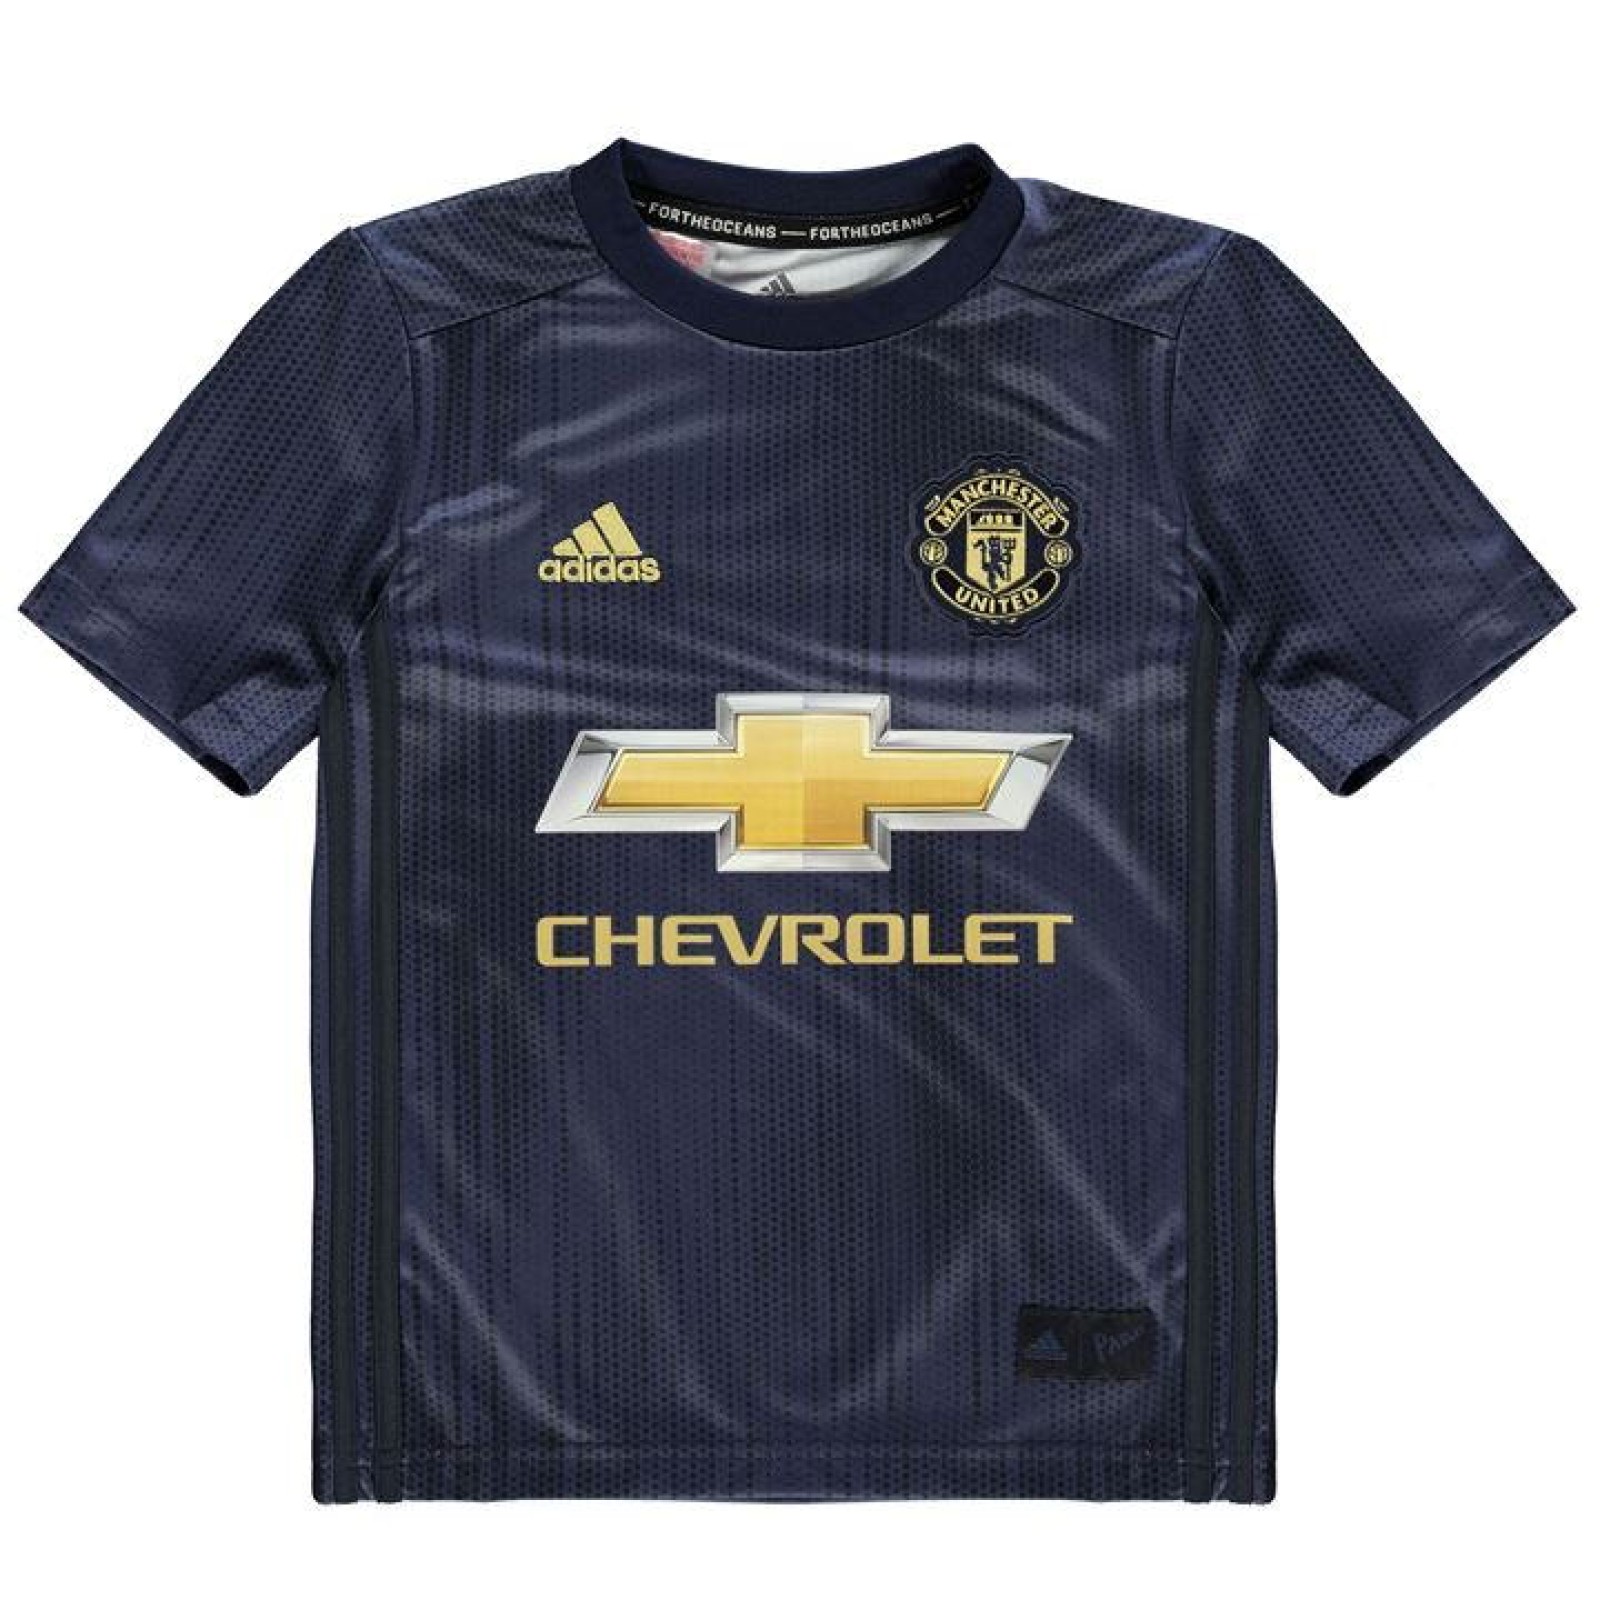 total sports manchester united jersey